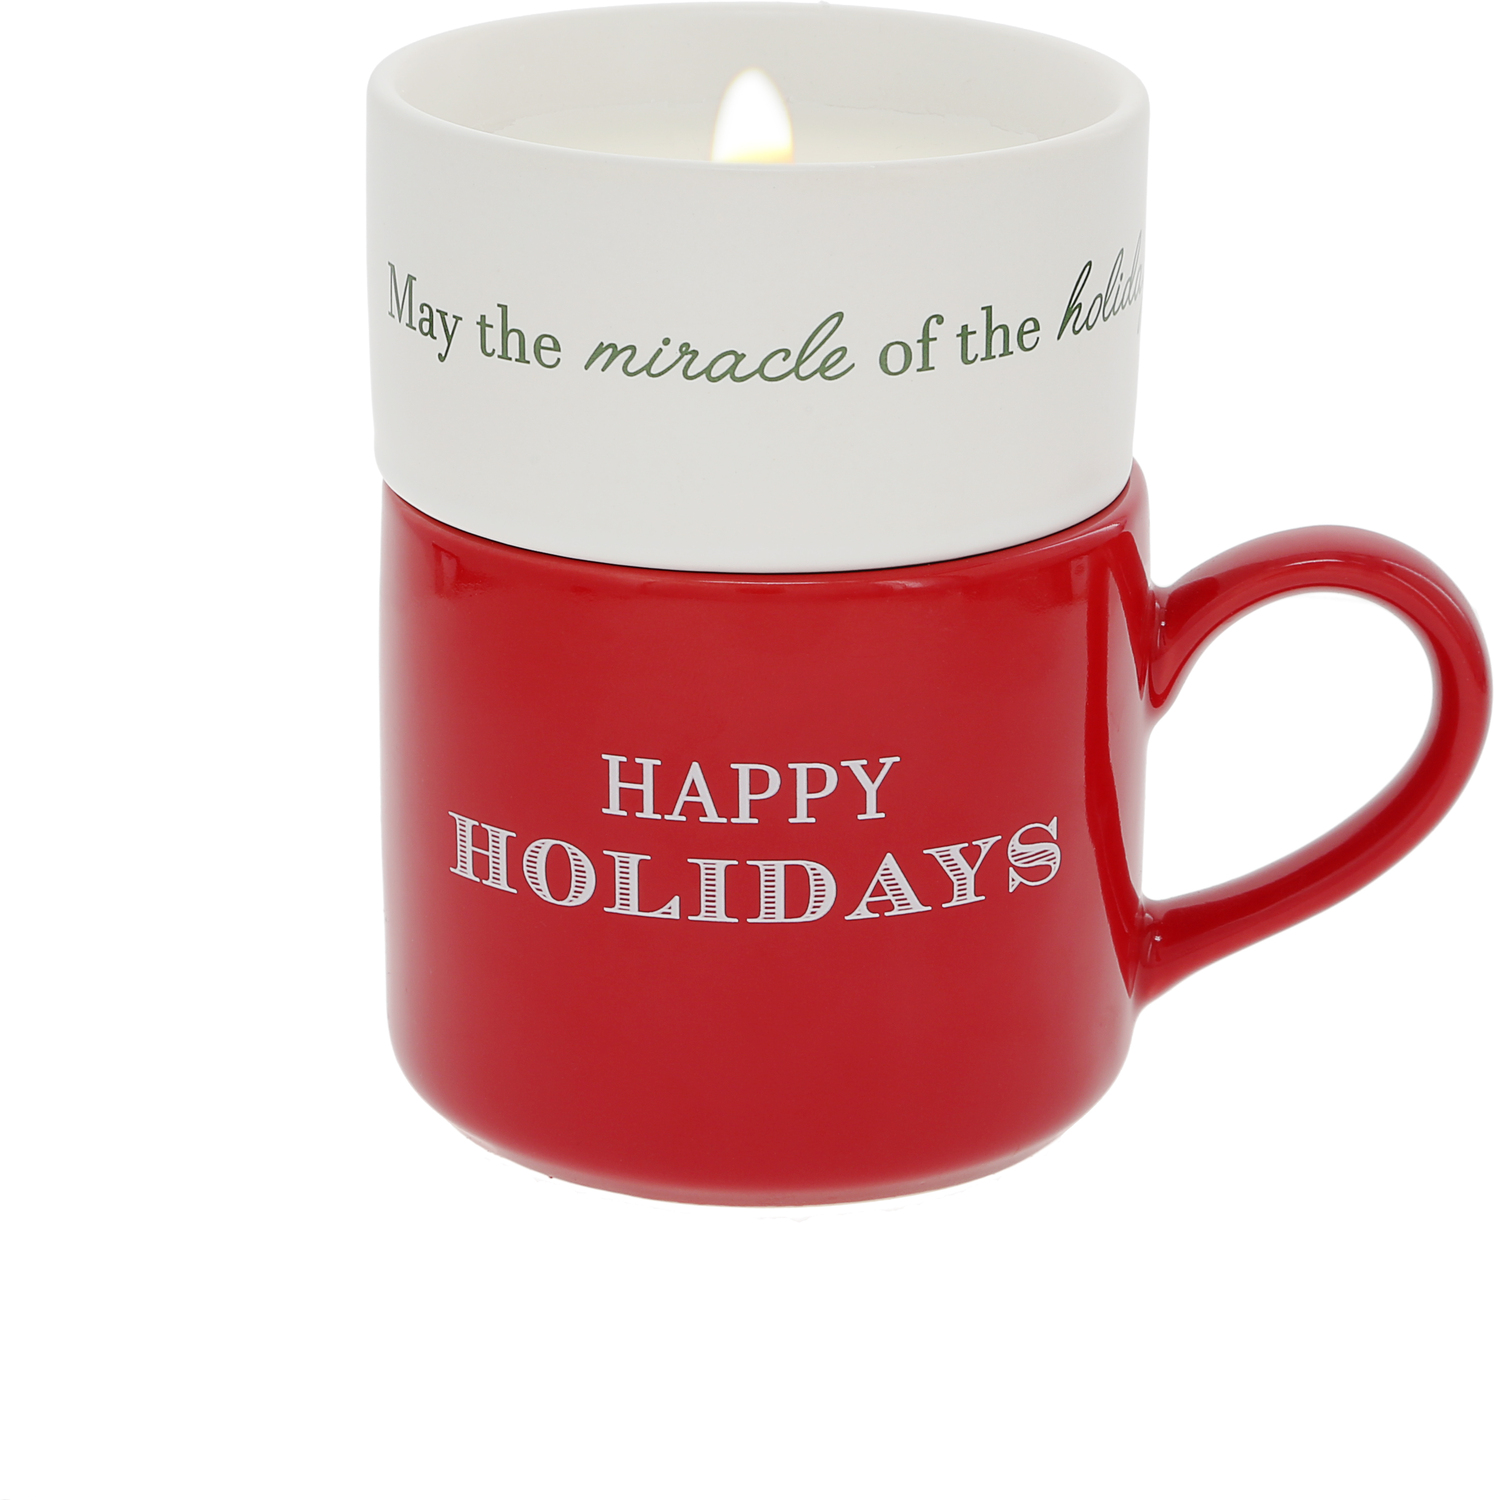 Happy Holidays by Filled with Warmth - Happy Holidays - Stacking Mug and Candle Set
100% Soy Wax Scent: Balsam Fir